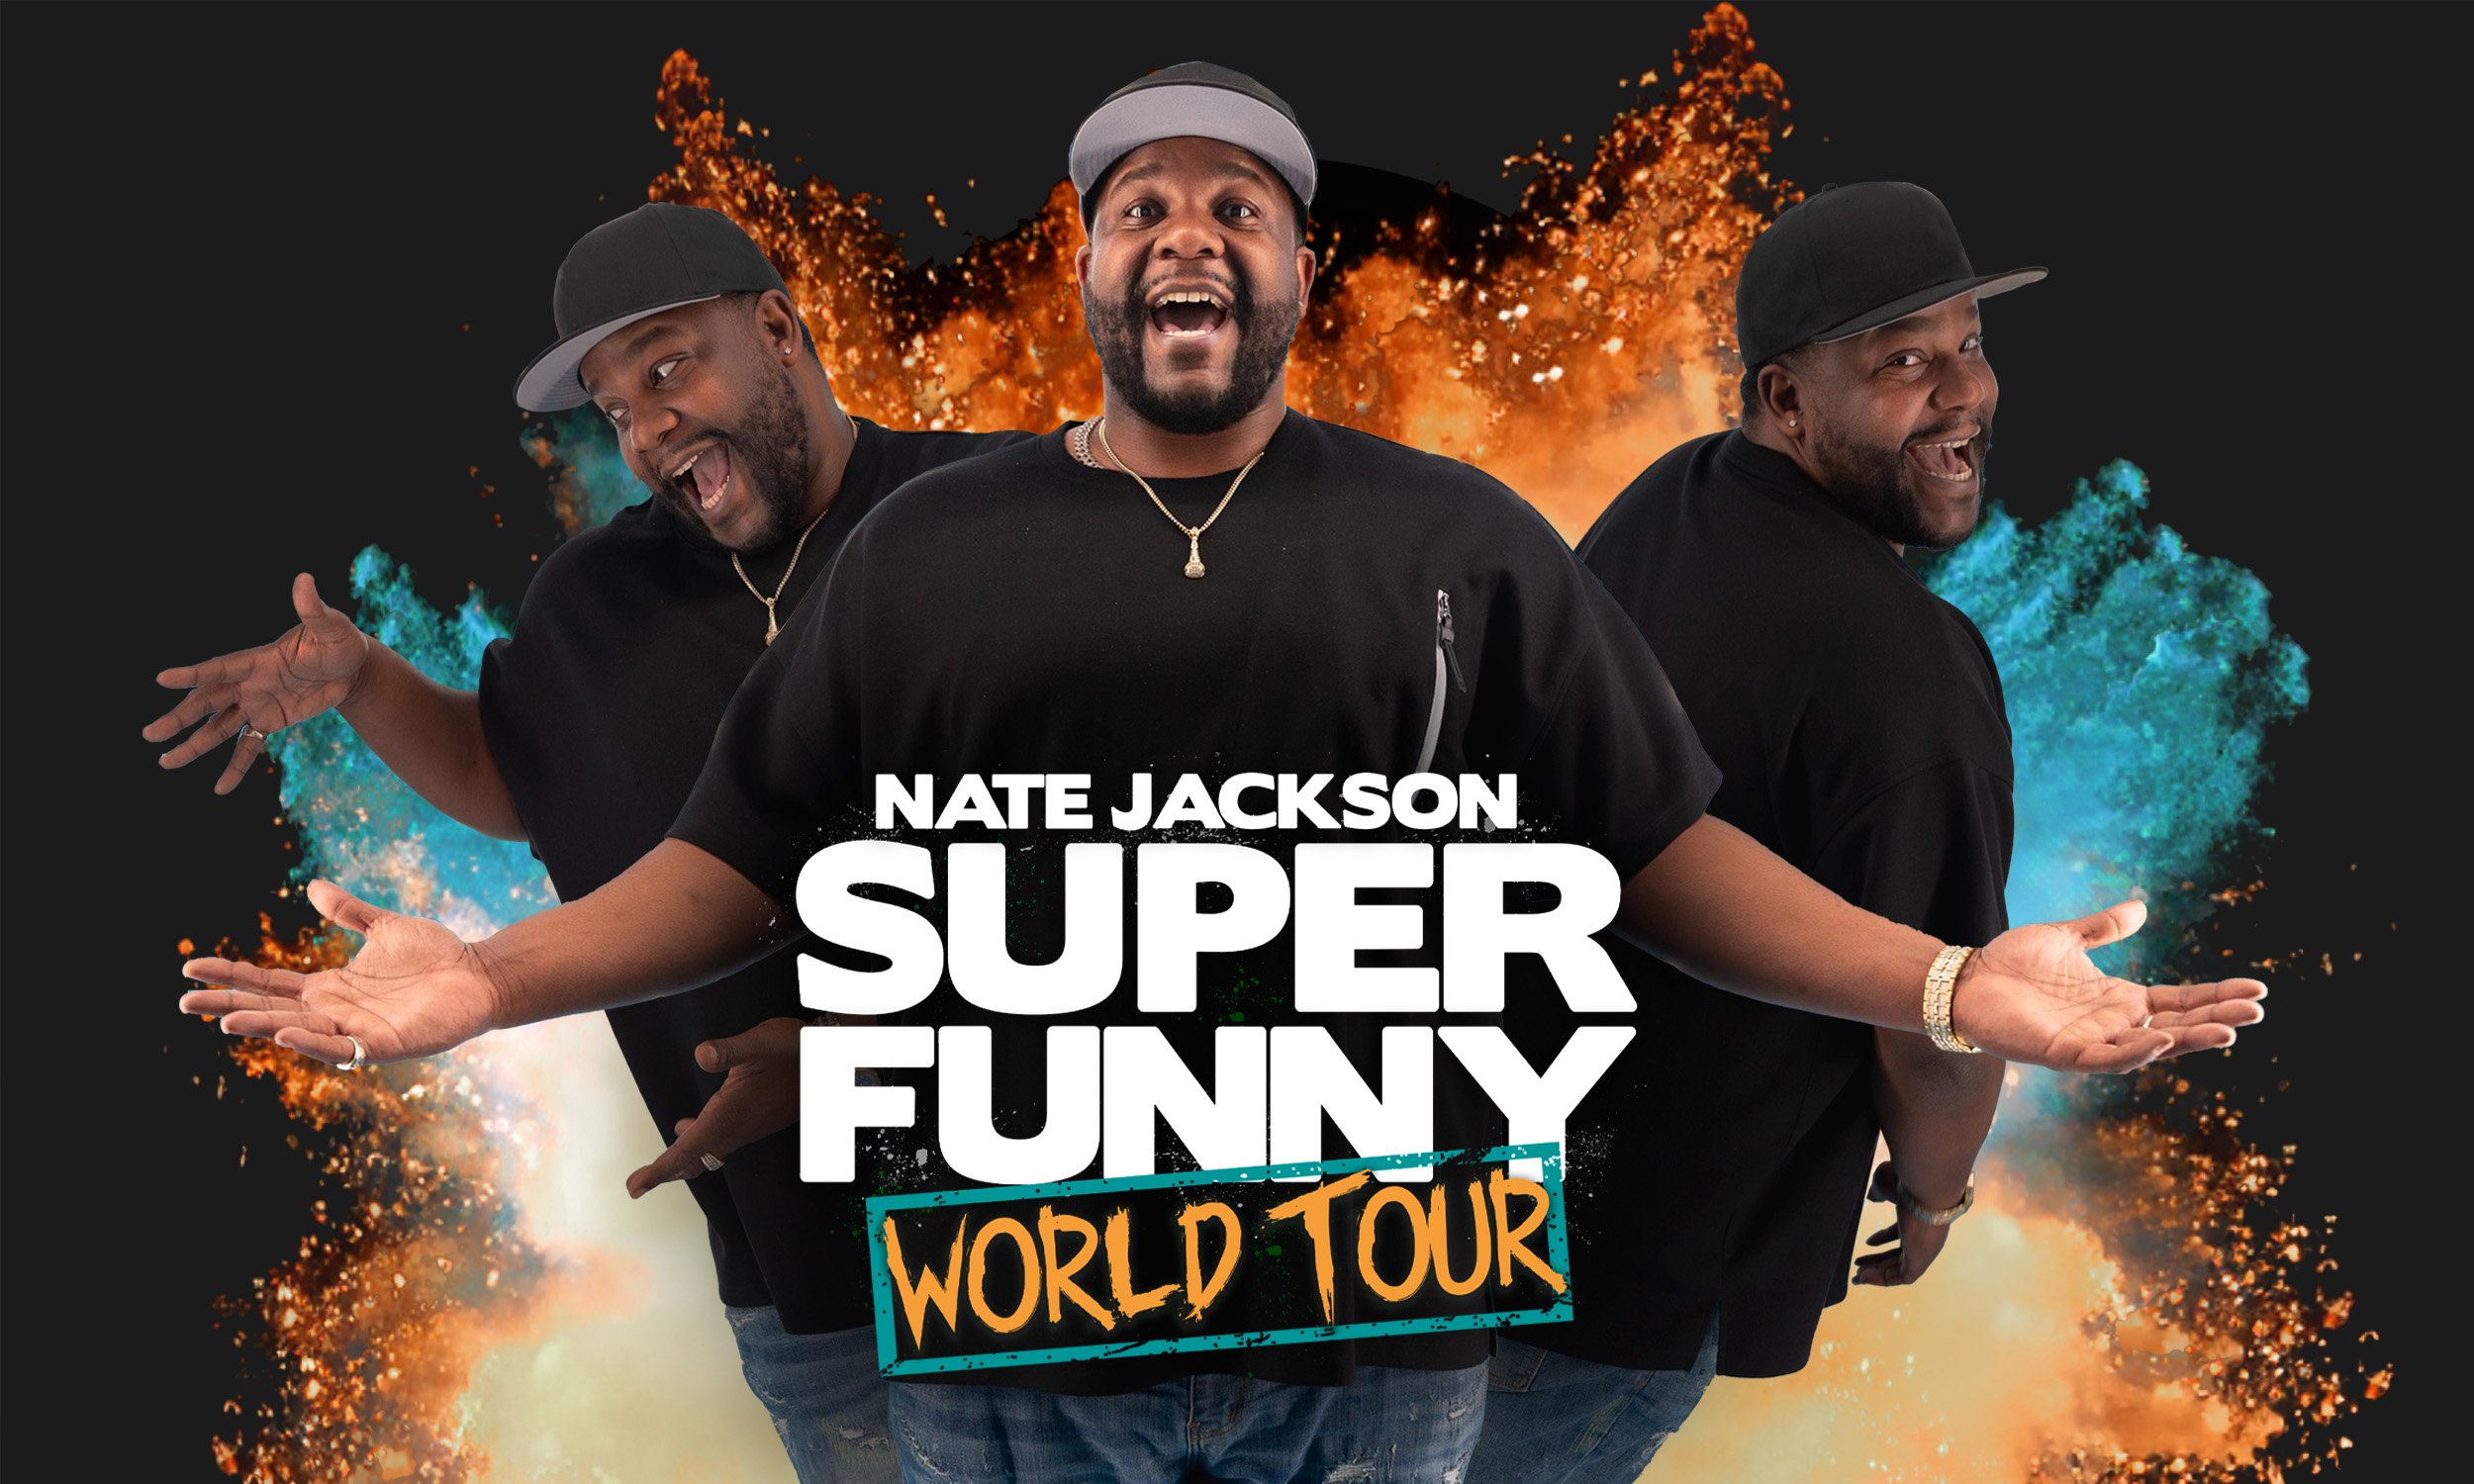 Nate Jackson: The Hilarious Comedian Taking Vegas By Storm